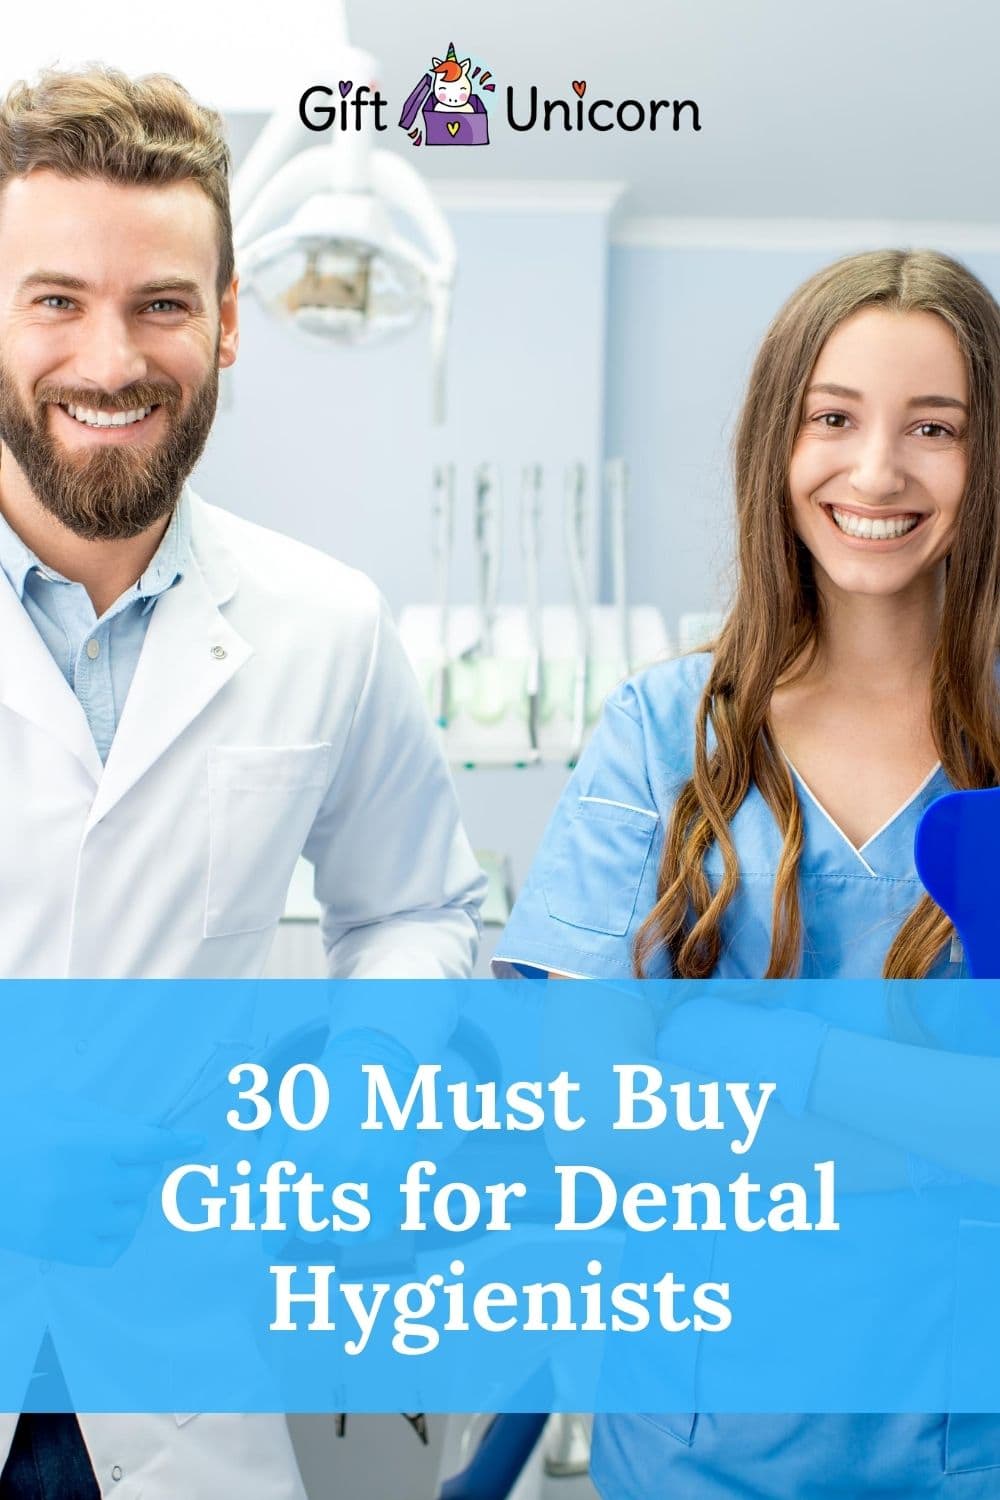 presents for dental hygienists professionals pin image